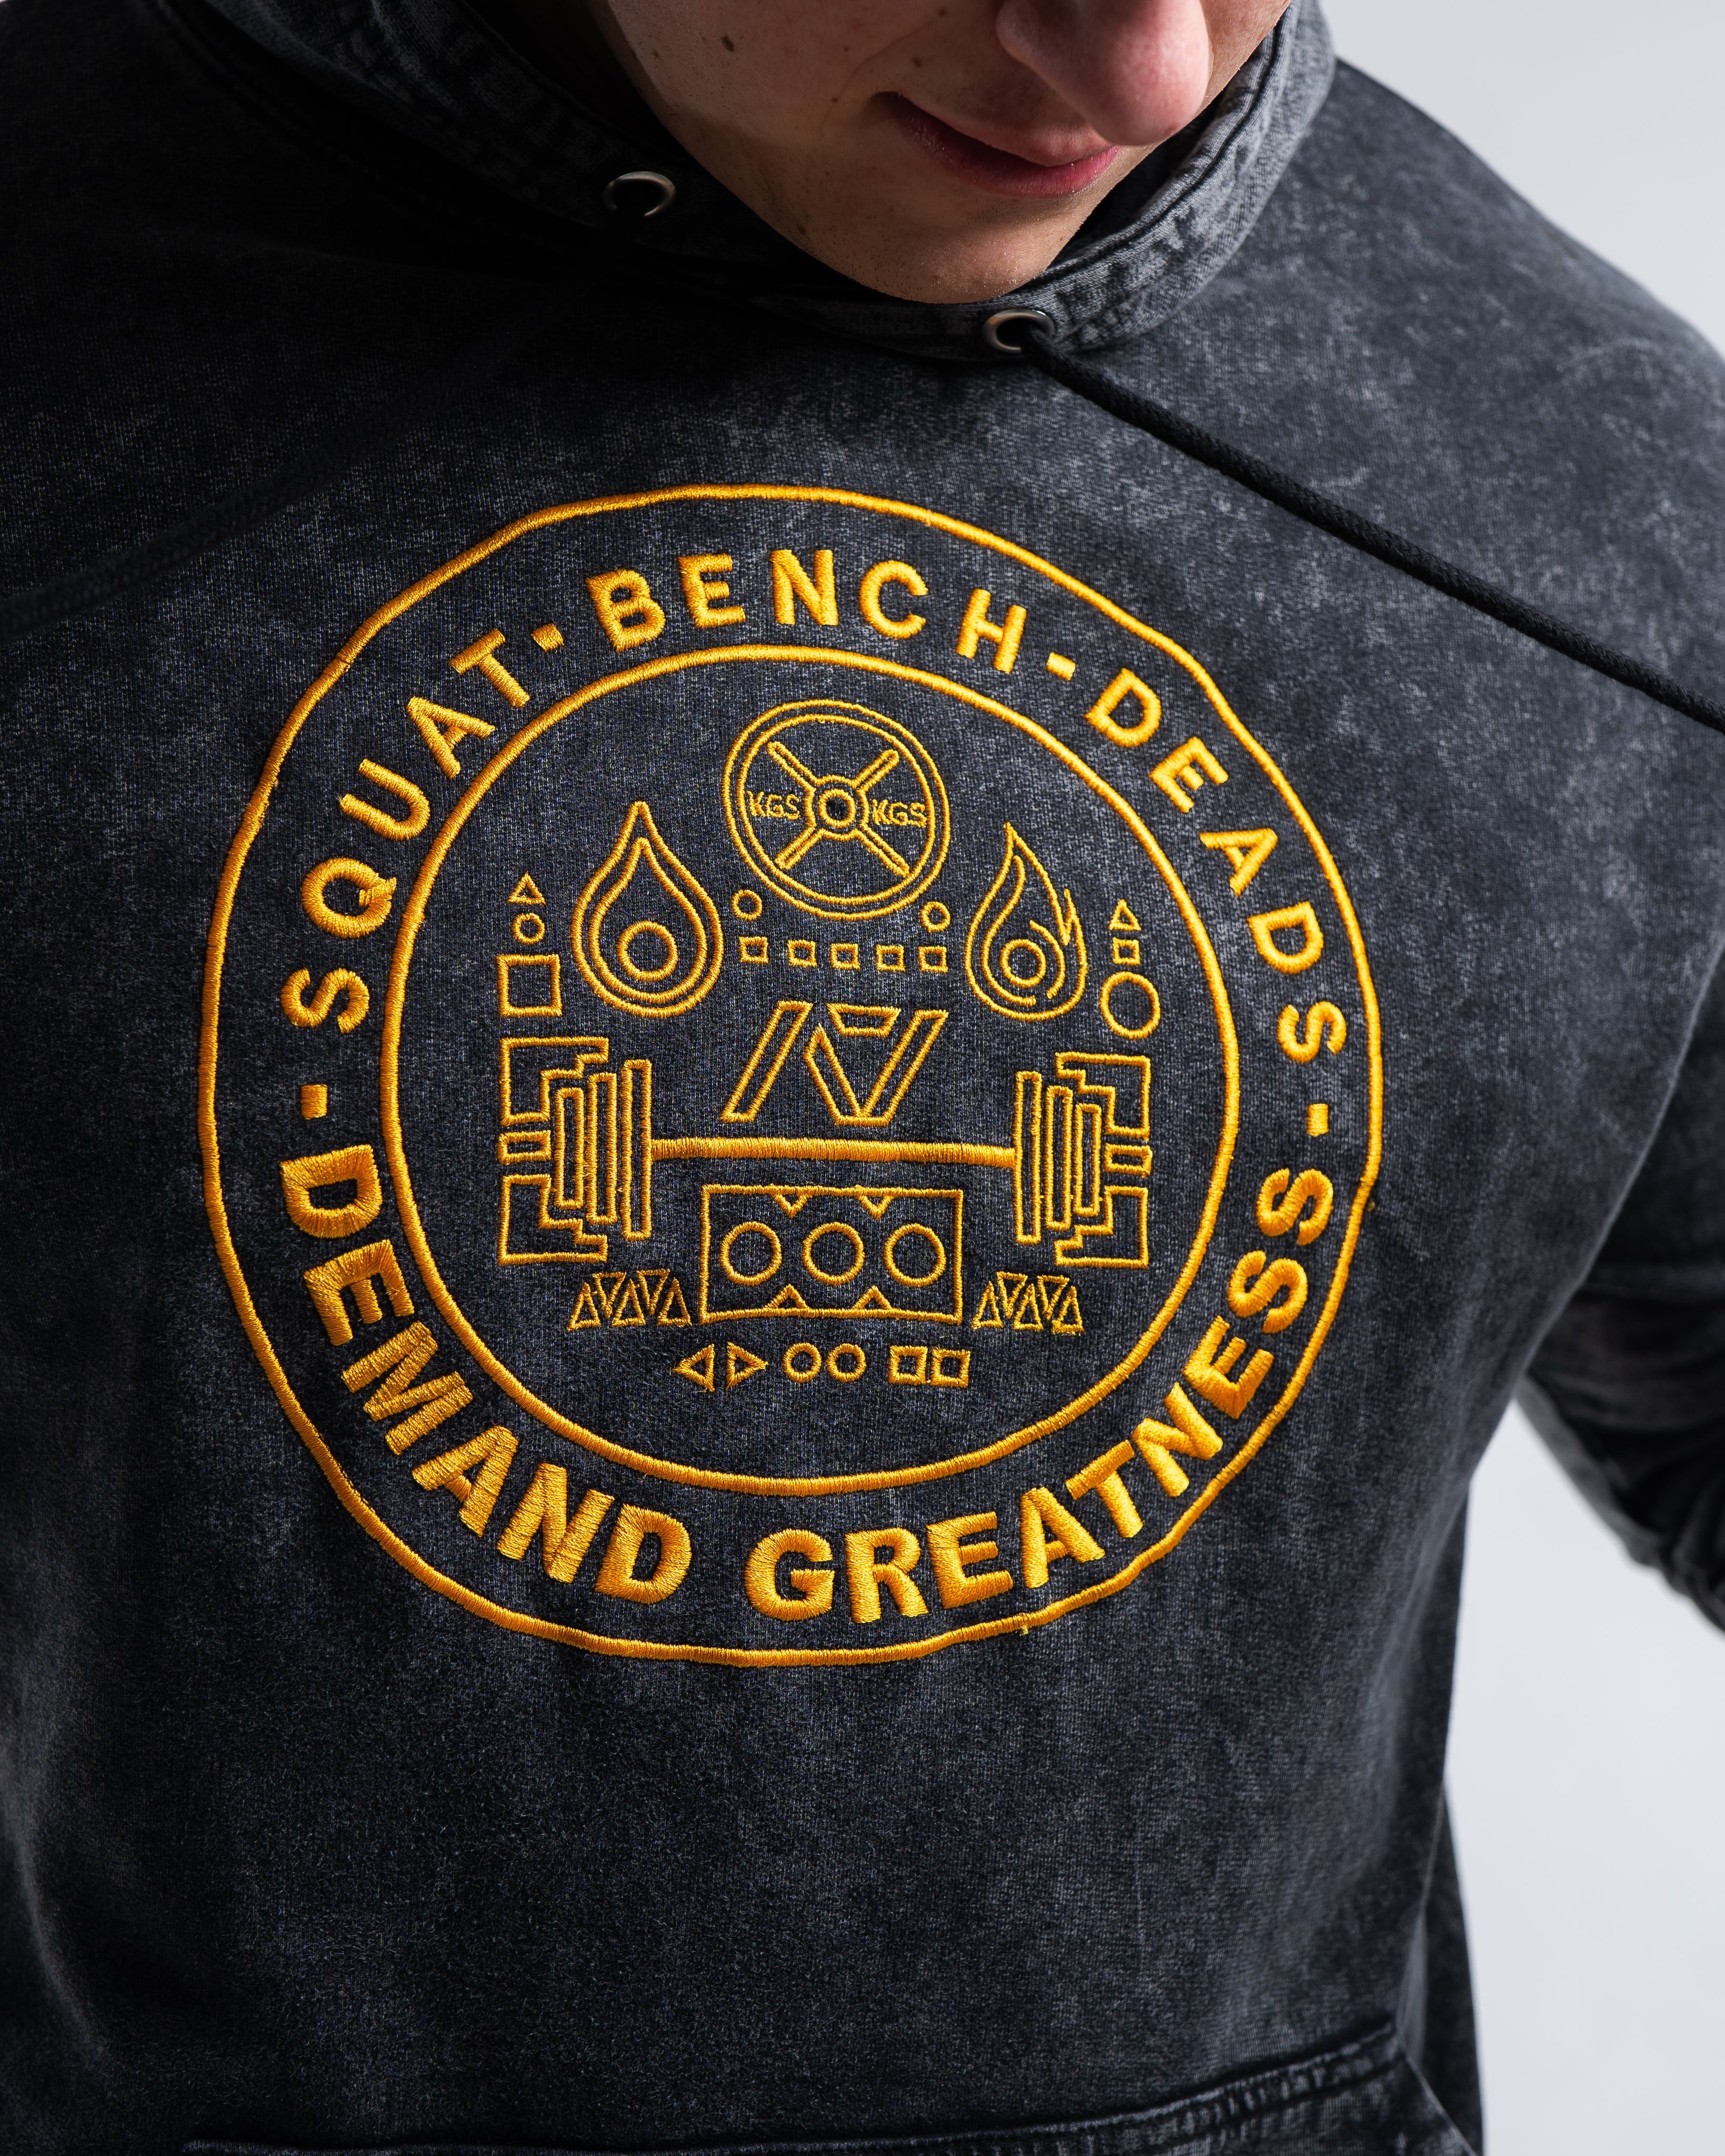 A single thread serves as the foundation of this collection. Thread, thoughtfully woven together to create a stronger bond, manifesting the showcase of its strength. Each strand connects the mindset of the athlete through their actions. Building a stronger foundation and the development of their Gold Medal Mentality. All A7 Powerlifting Equipment shipping to UK, Norway, Switzerland and Iceland.